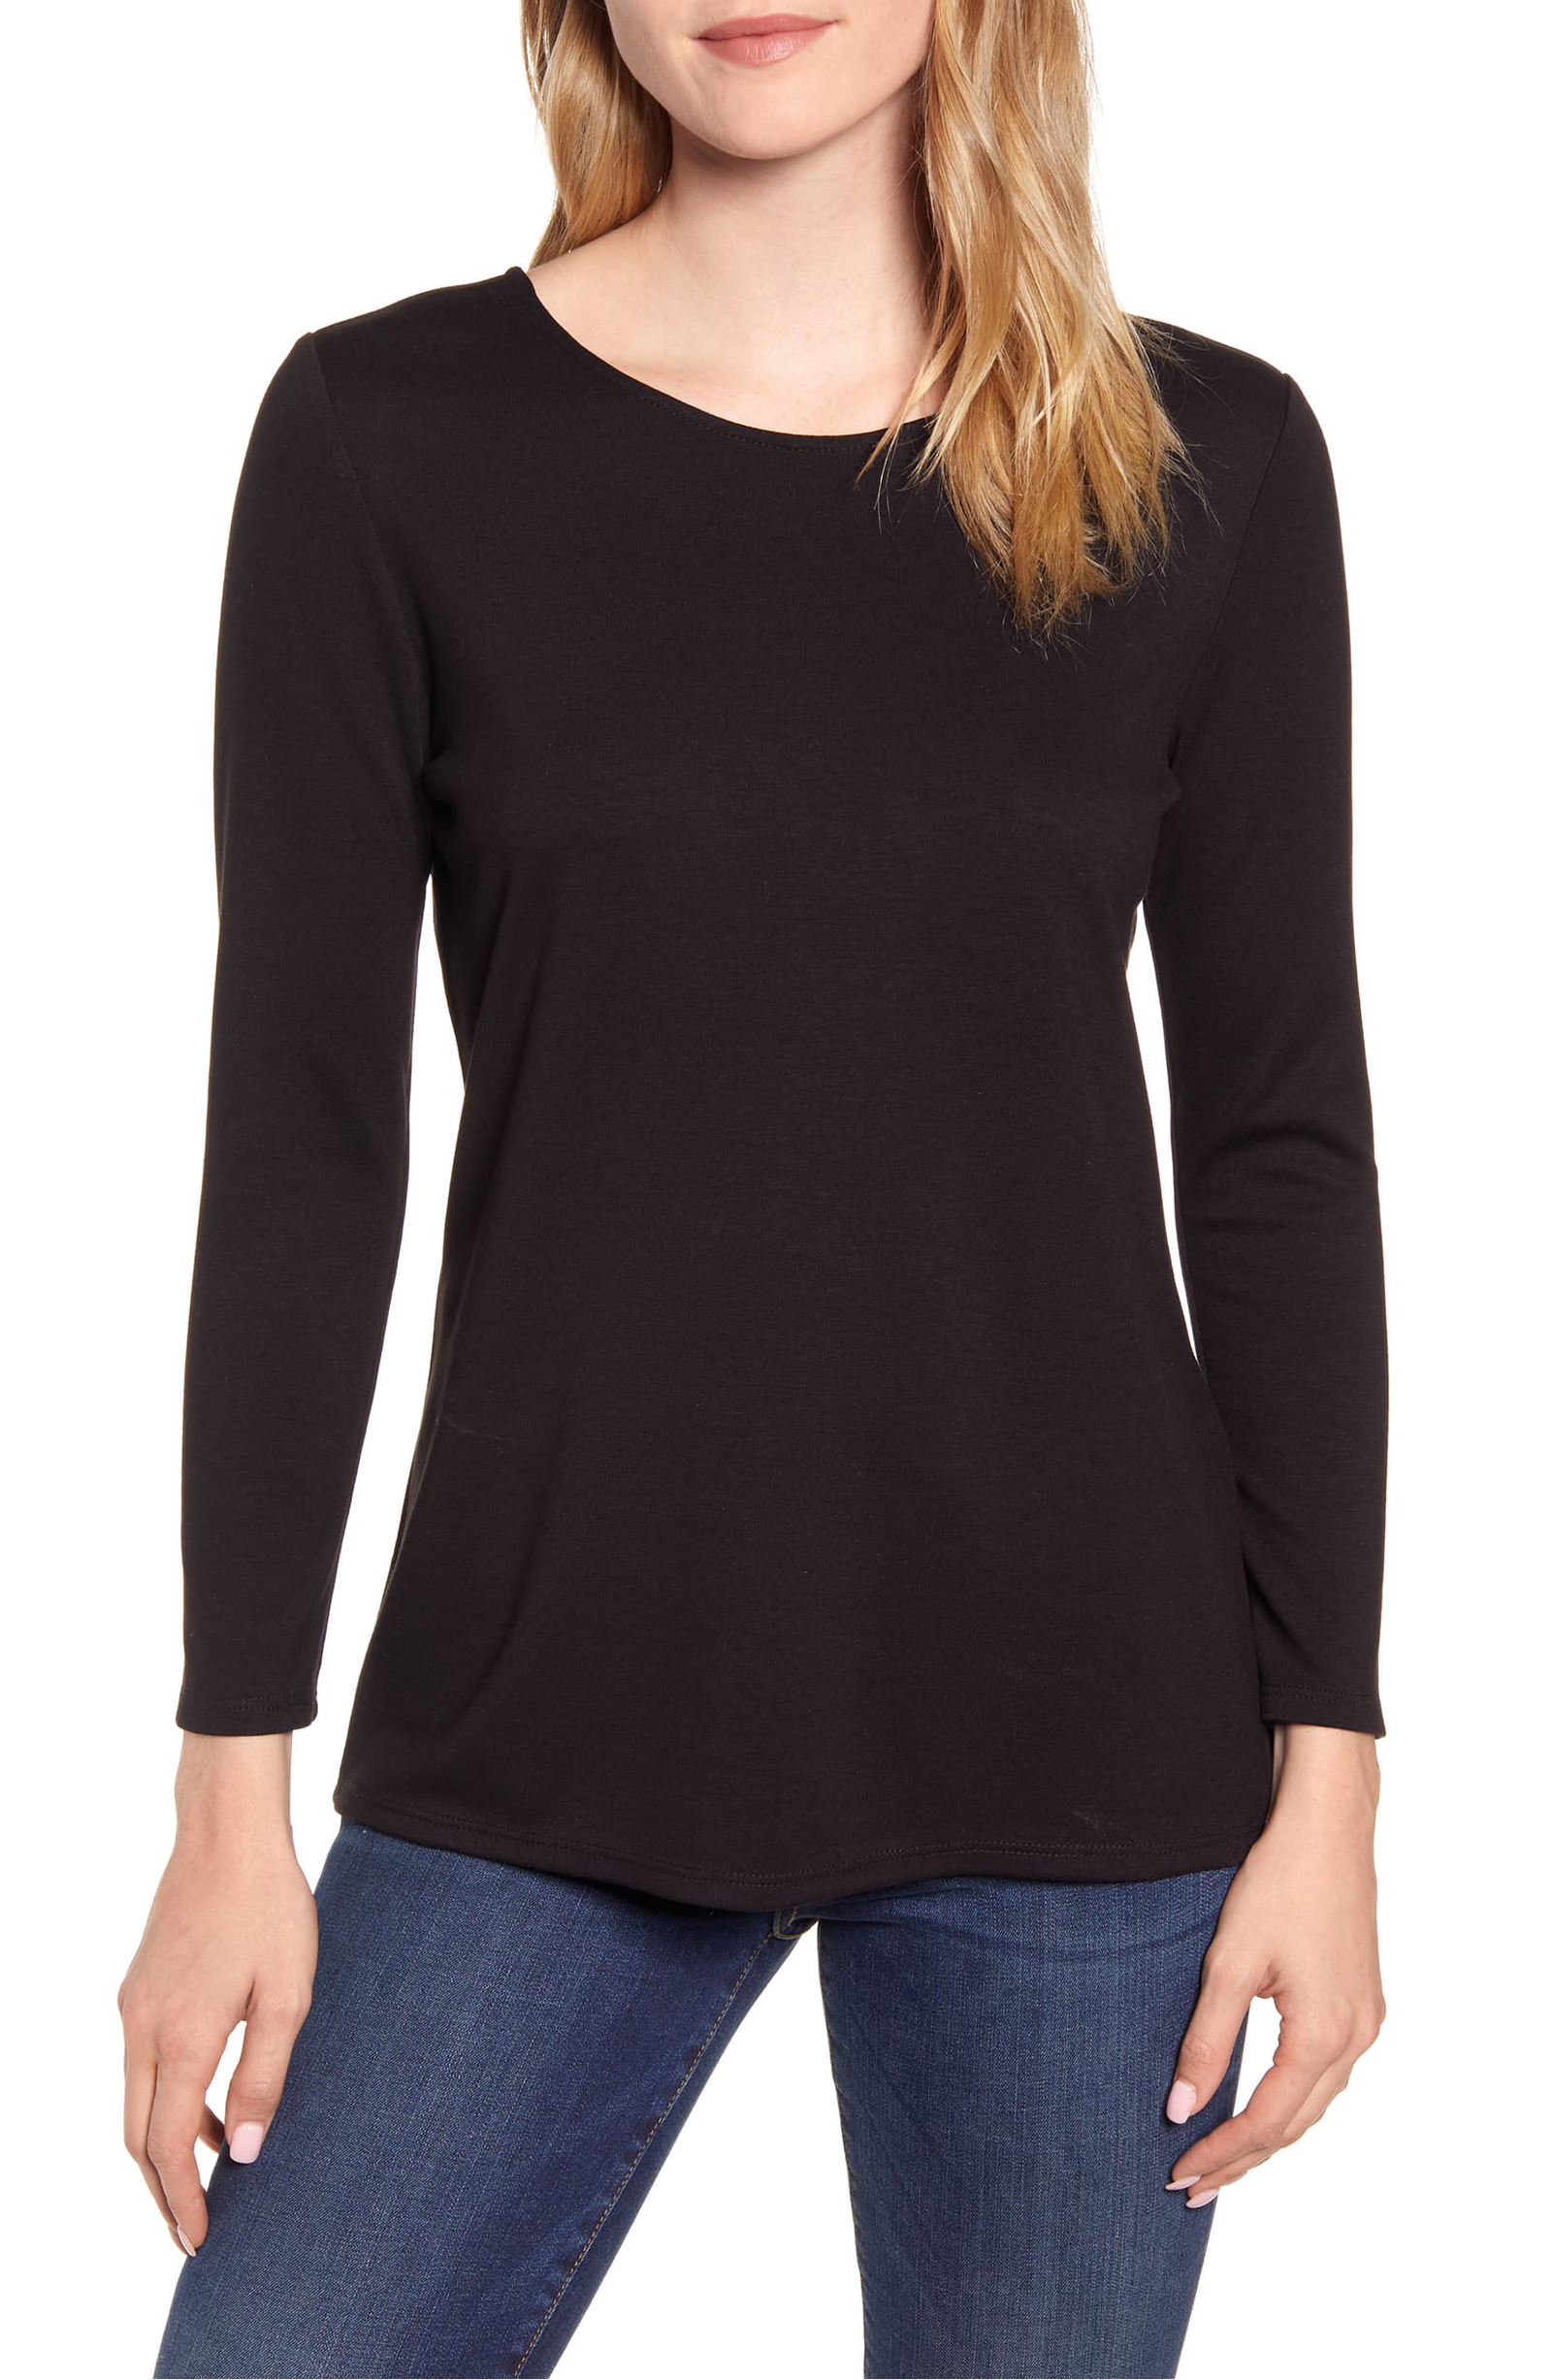 This Gibson Top Is Stunningly Soft and Goes With Everything